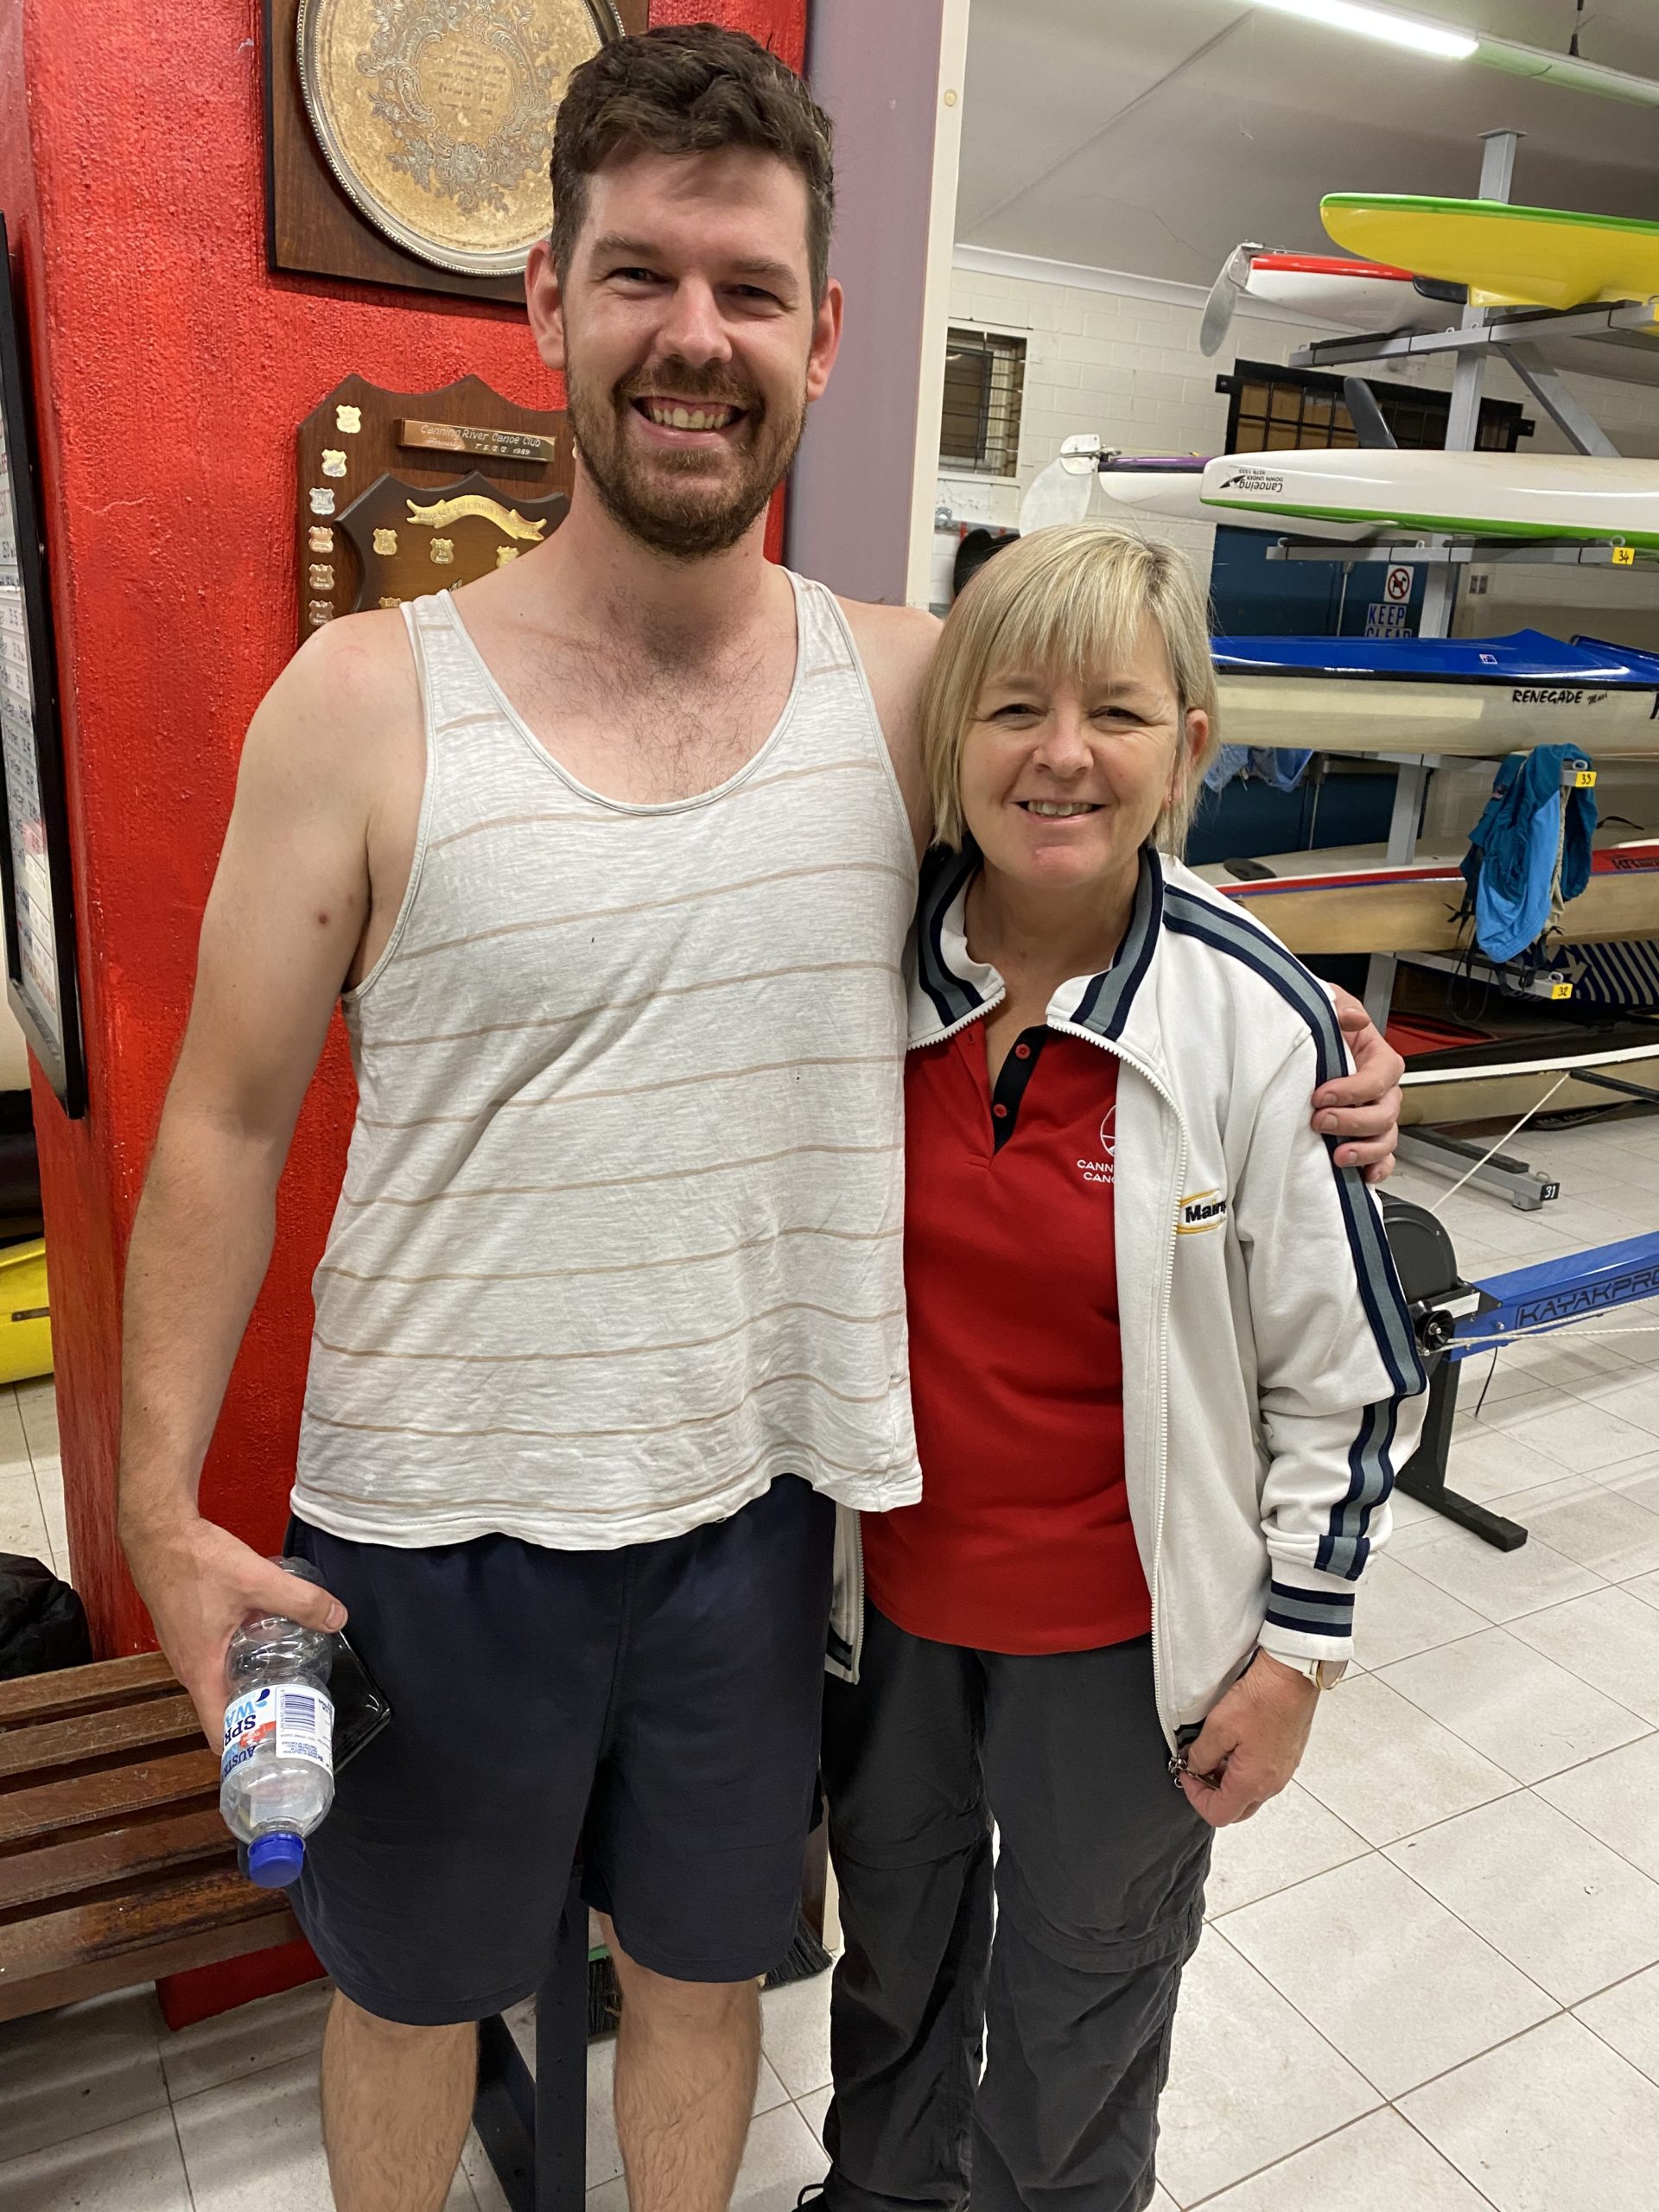 Tuesday 23rd March 20-21 : Tonight’s photo shows club committee member welcoming new paddler Joss Doak-Smith to tonight’s event.